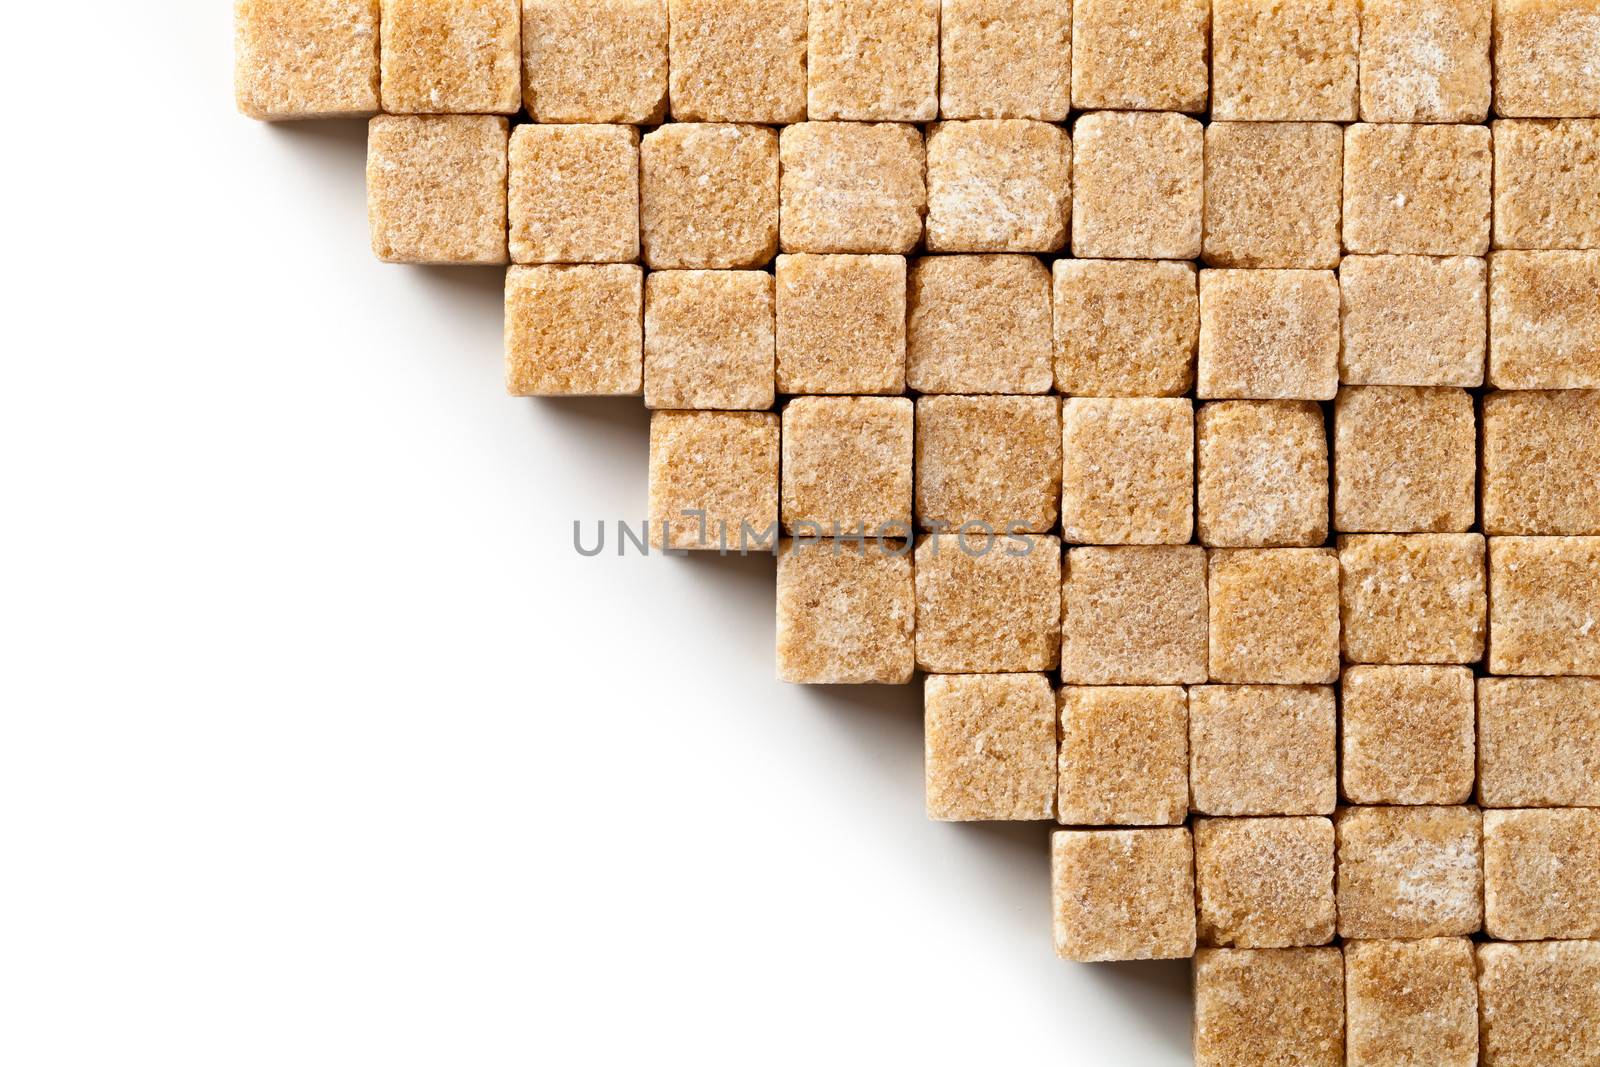 Brown sugar cubes on white background. Copy space. Top view